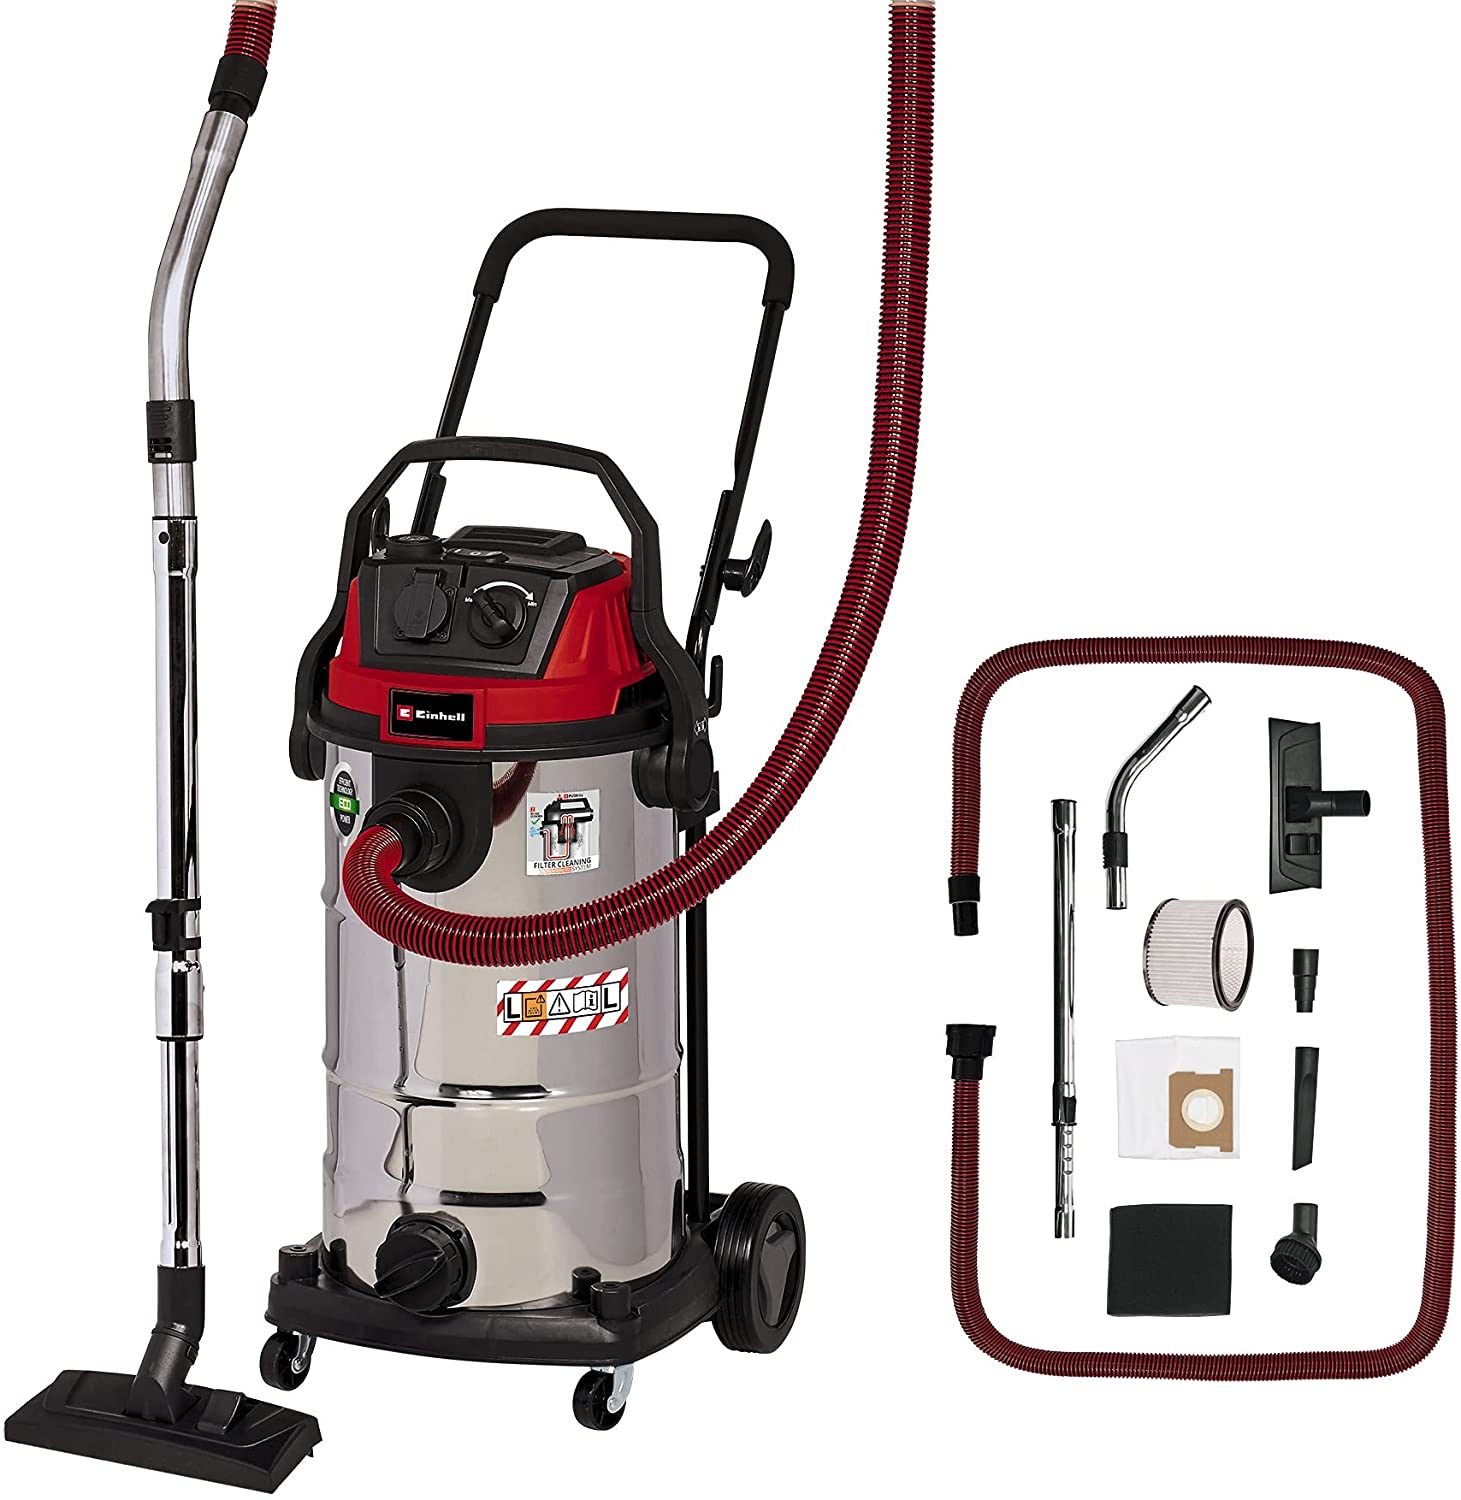 Einhell TE-VC 2340 SACL, wet/dry vacuum cleaner (burgundy red/stainless steel) 2342470 (4006825658347)